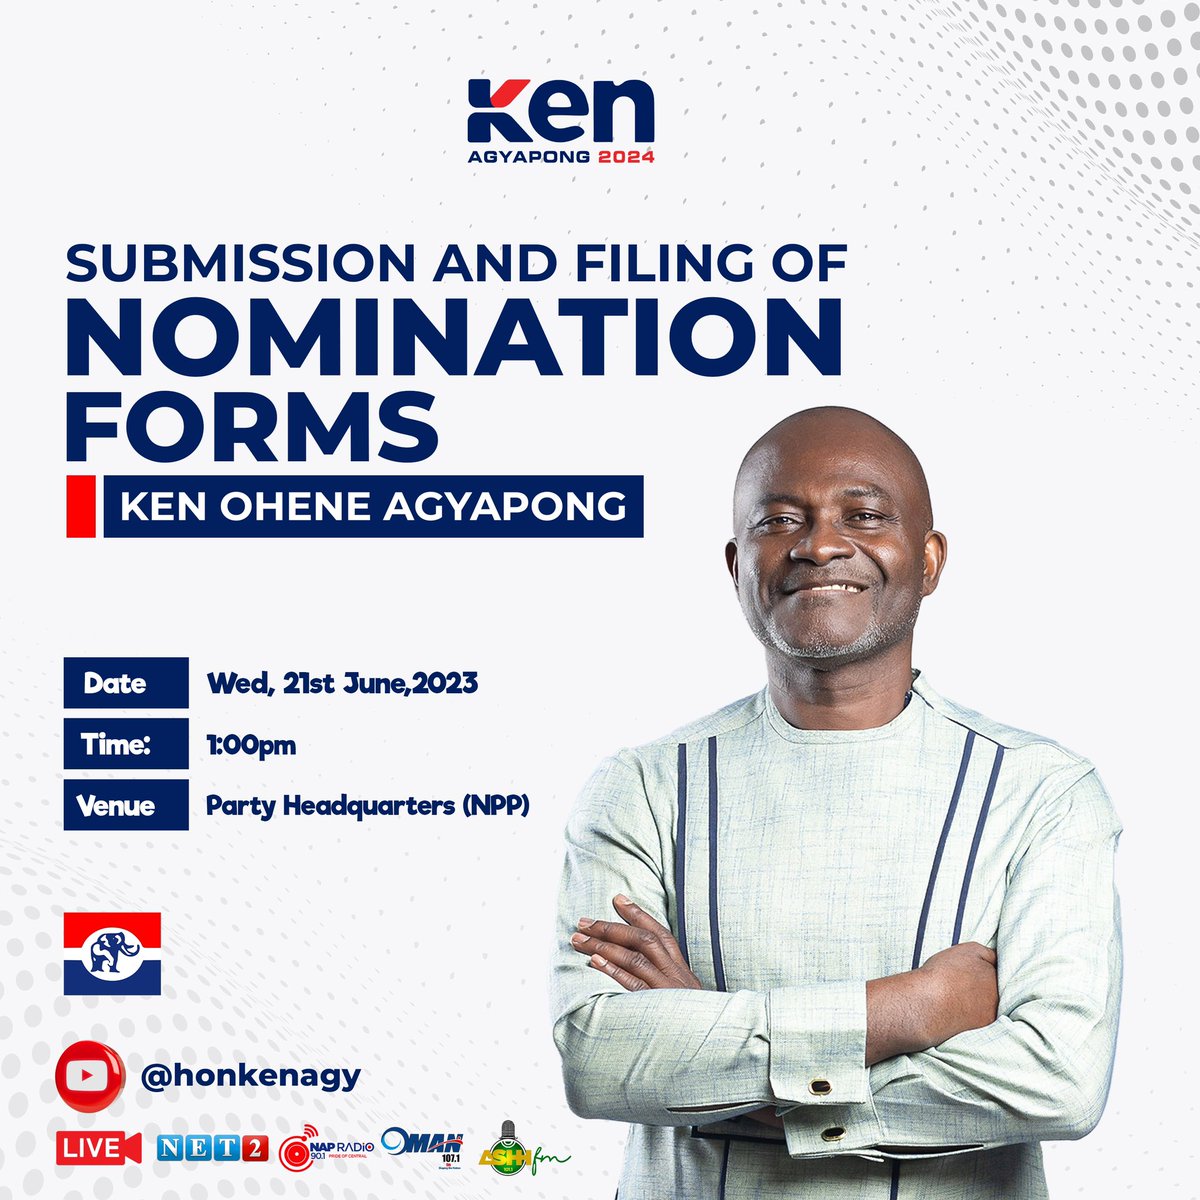 SUBMISSION AND FILING OF NOMINATION FORMS | KEN OHENE AGYAPONG

DATE: WED, 21ST JUNE,2023 
TIME: 1 PM
VENUE: PARTY HEADQUARTERS (NPP)

LIVESTREAM LINK 🔗 
youtube.com/live/r80EUMmy1…

#Kennedy4President
#KenCanDo🇳🇱
#GhanaFirst🇬🇭
#TeamPHD

🔴⚪🔵